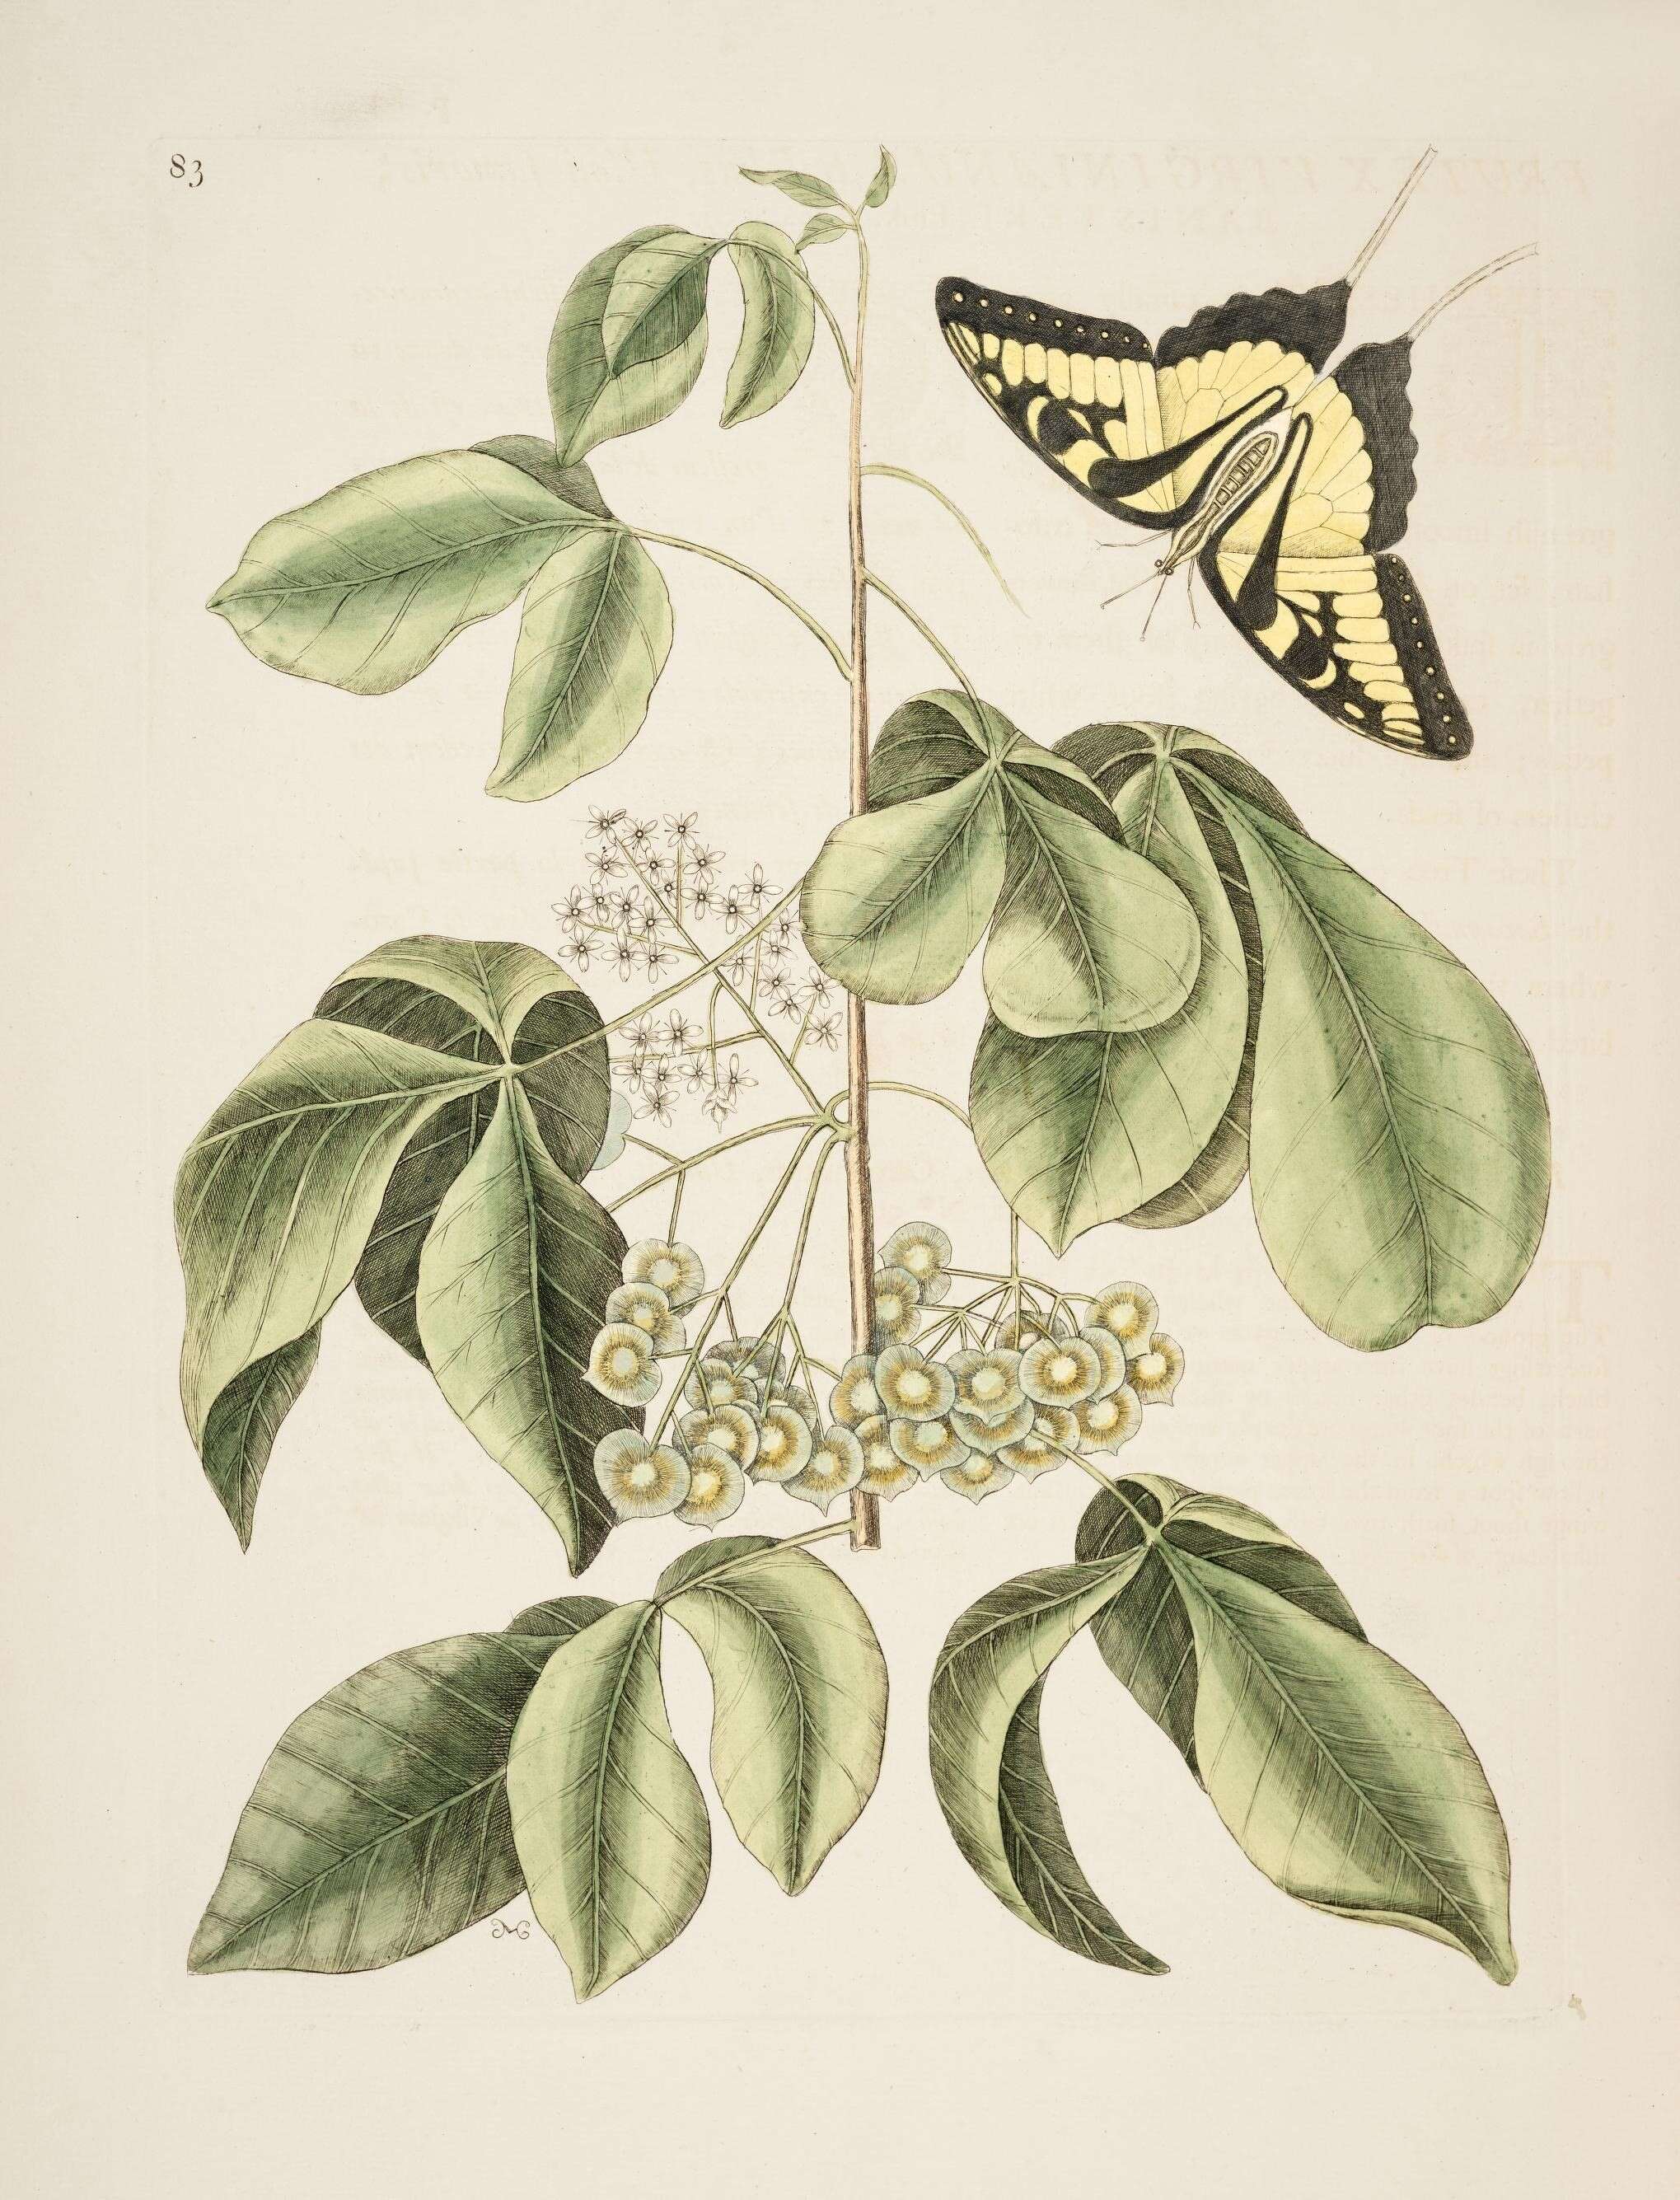 Image of common hoptree